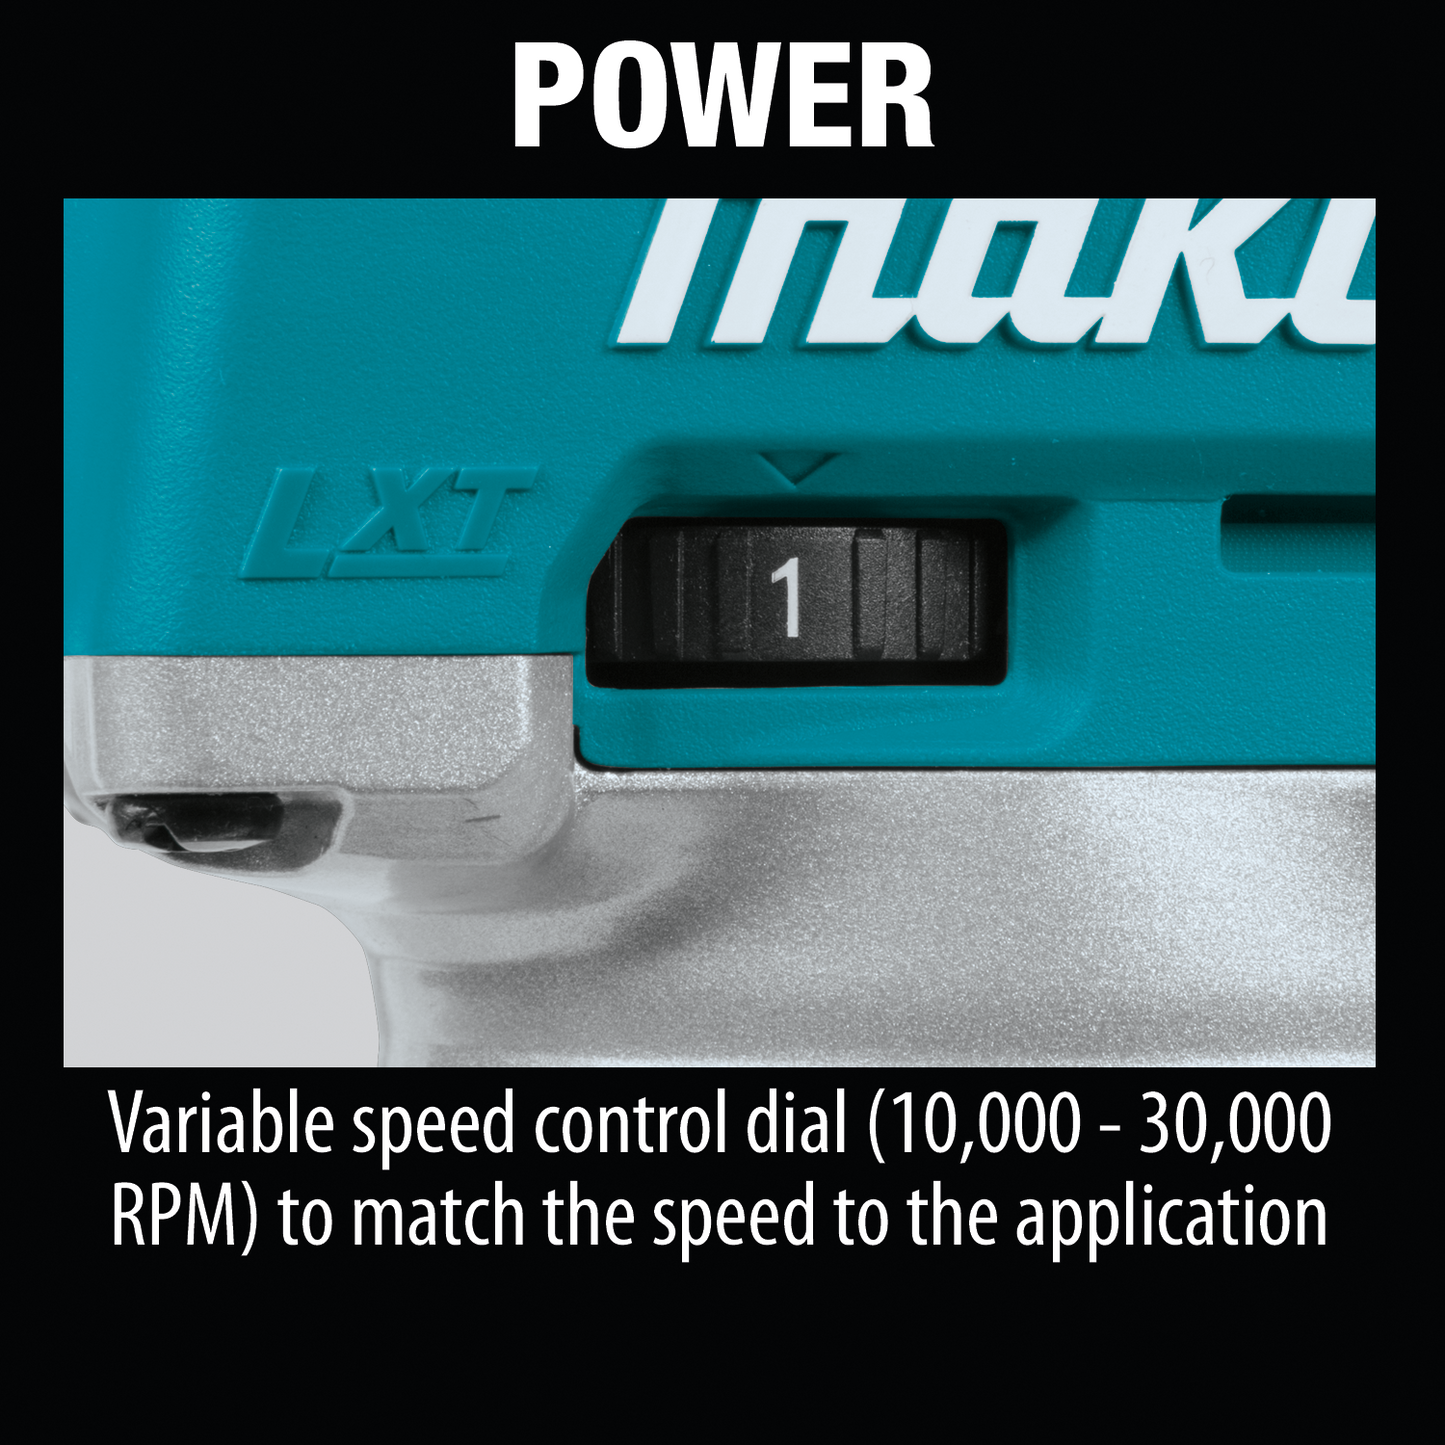 Makita 18 Volt LXT Lithium Ion Brushless Cordless Compact Router Factory Serviced (Tool Only)